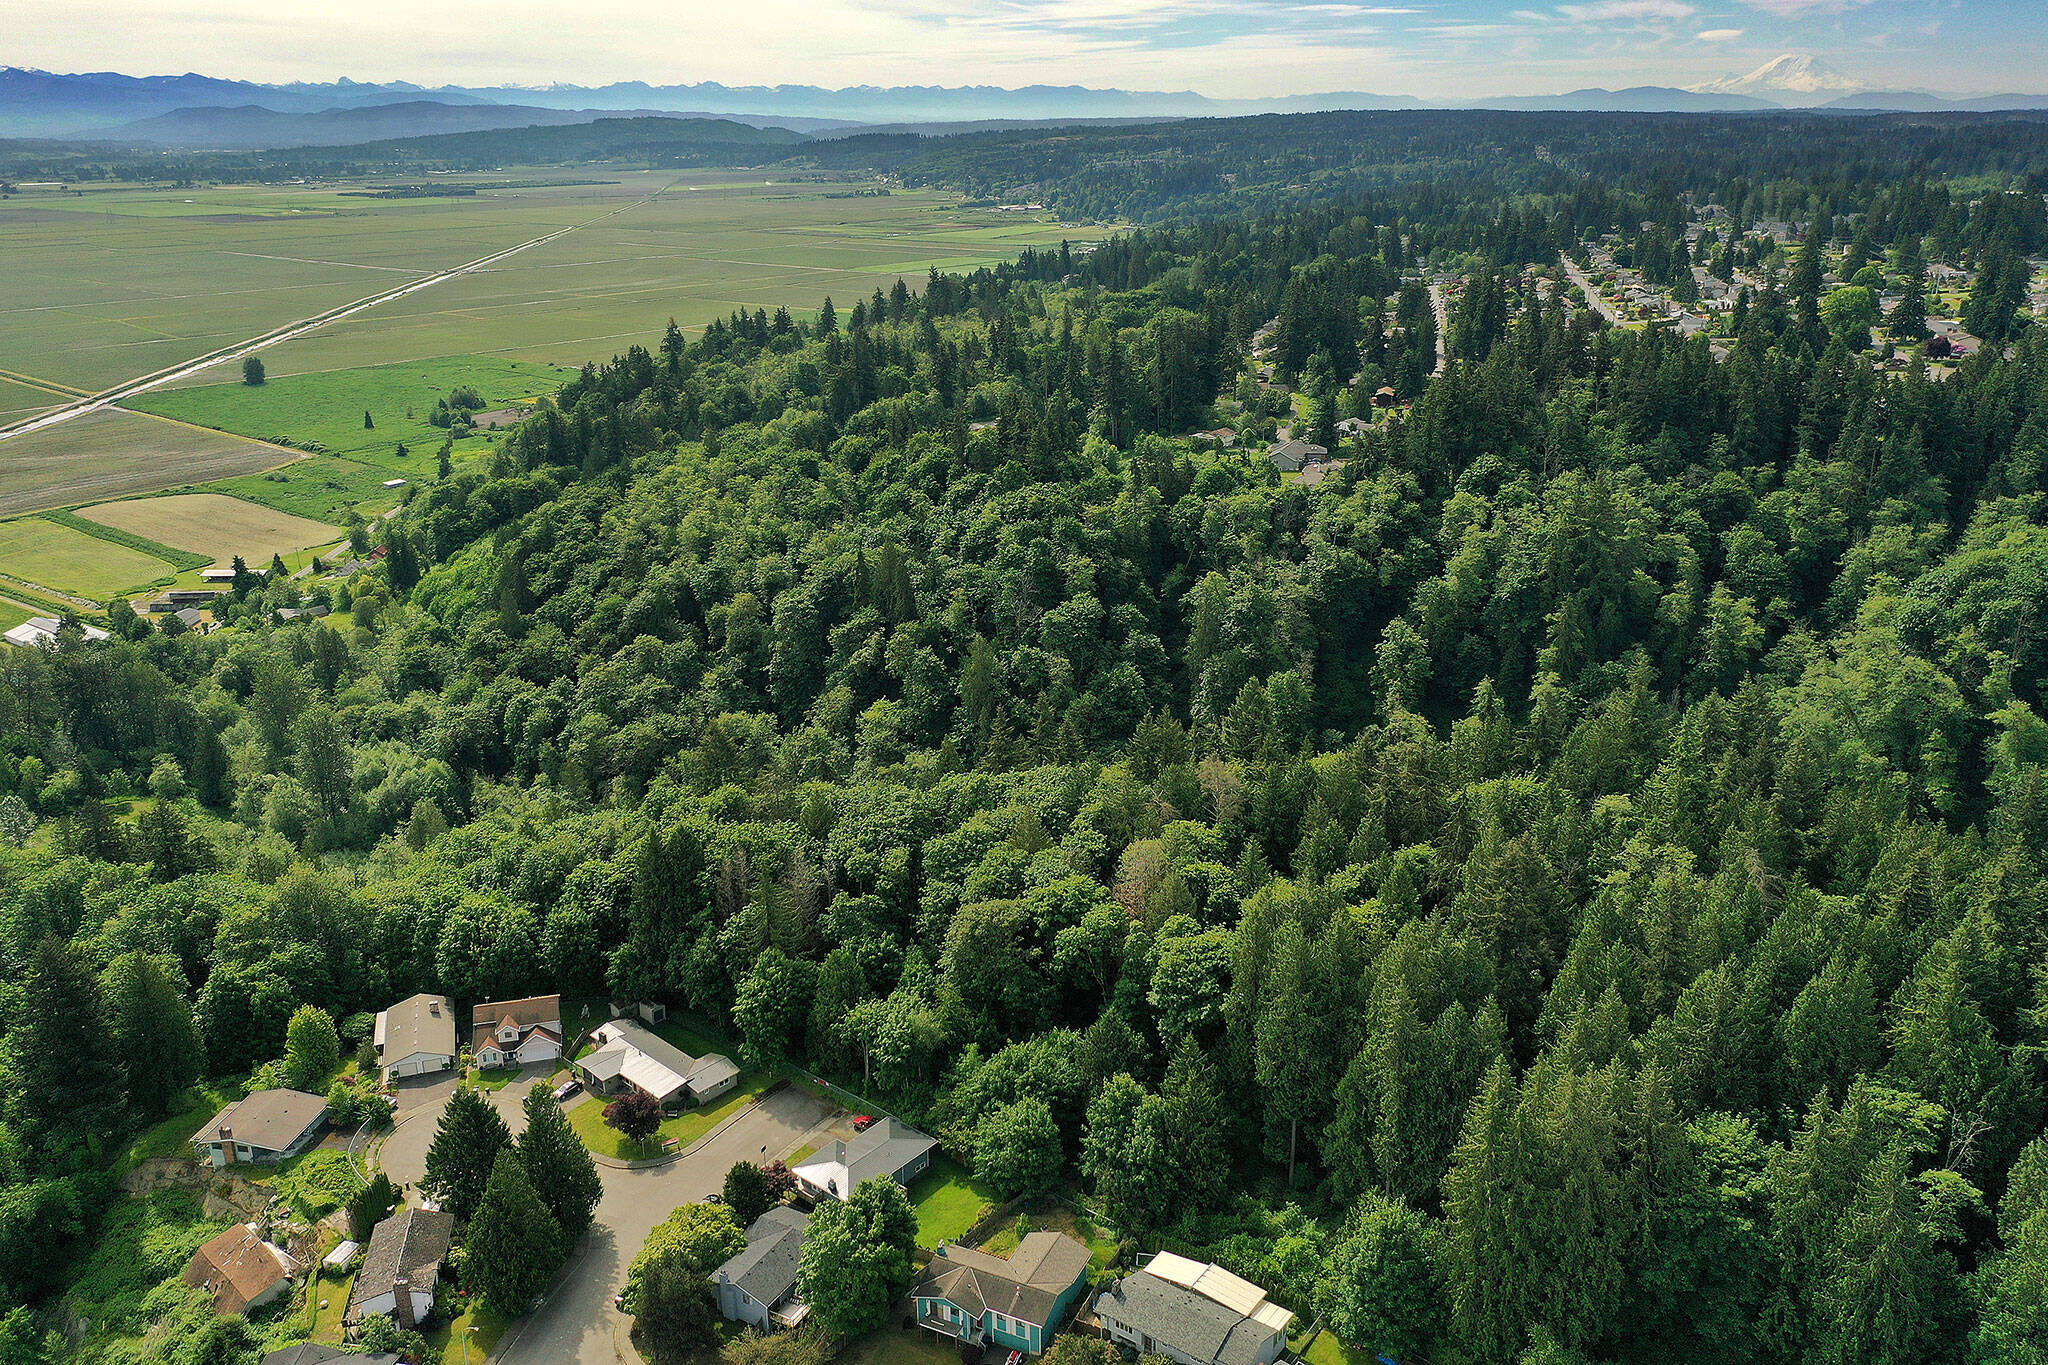 The forested Wood Creek drainage and Burl Place of the Valley View neighborhood (lower left), where several homes have slid or slumped down an unstable slope. (Chuck Taylor / Herald file)